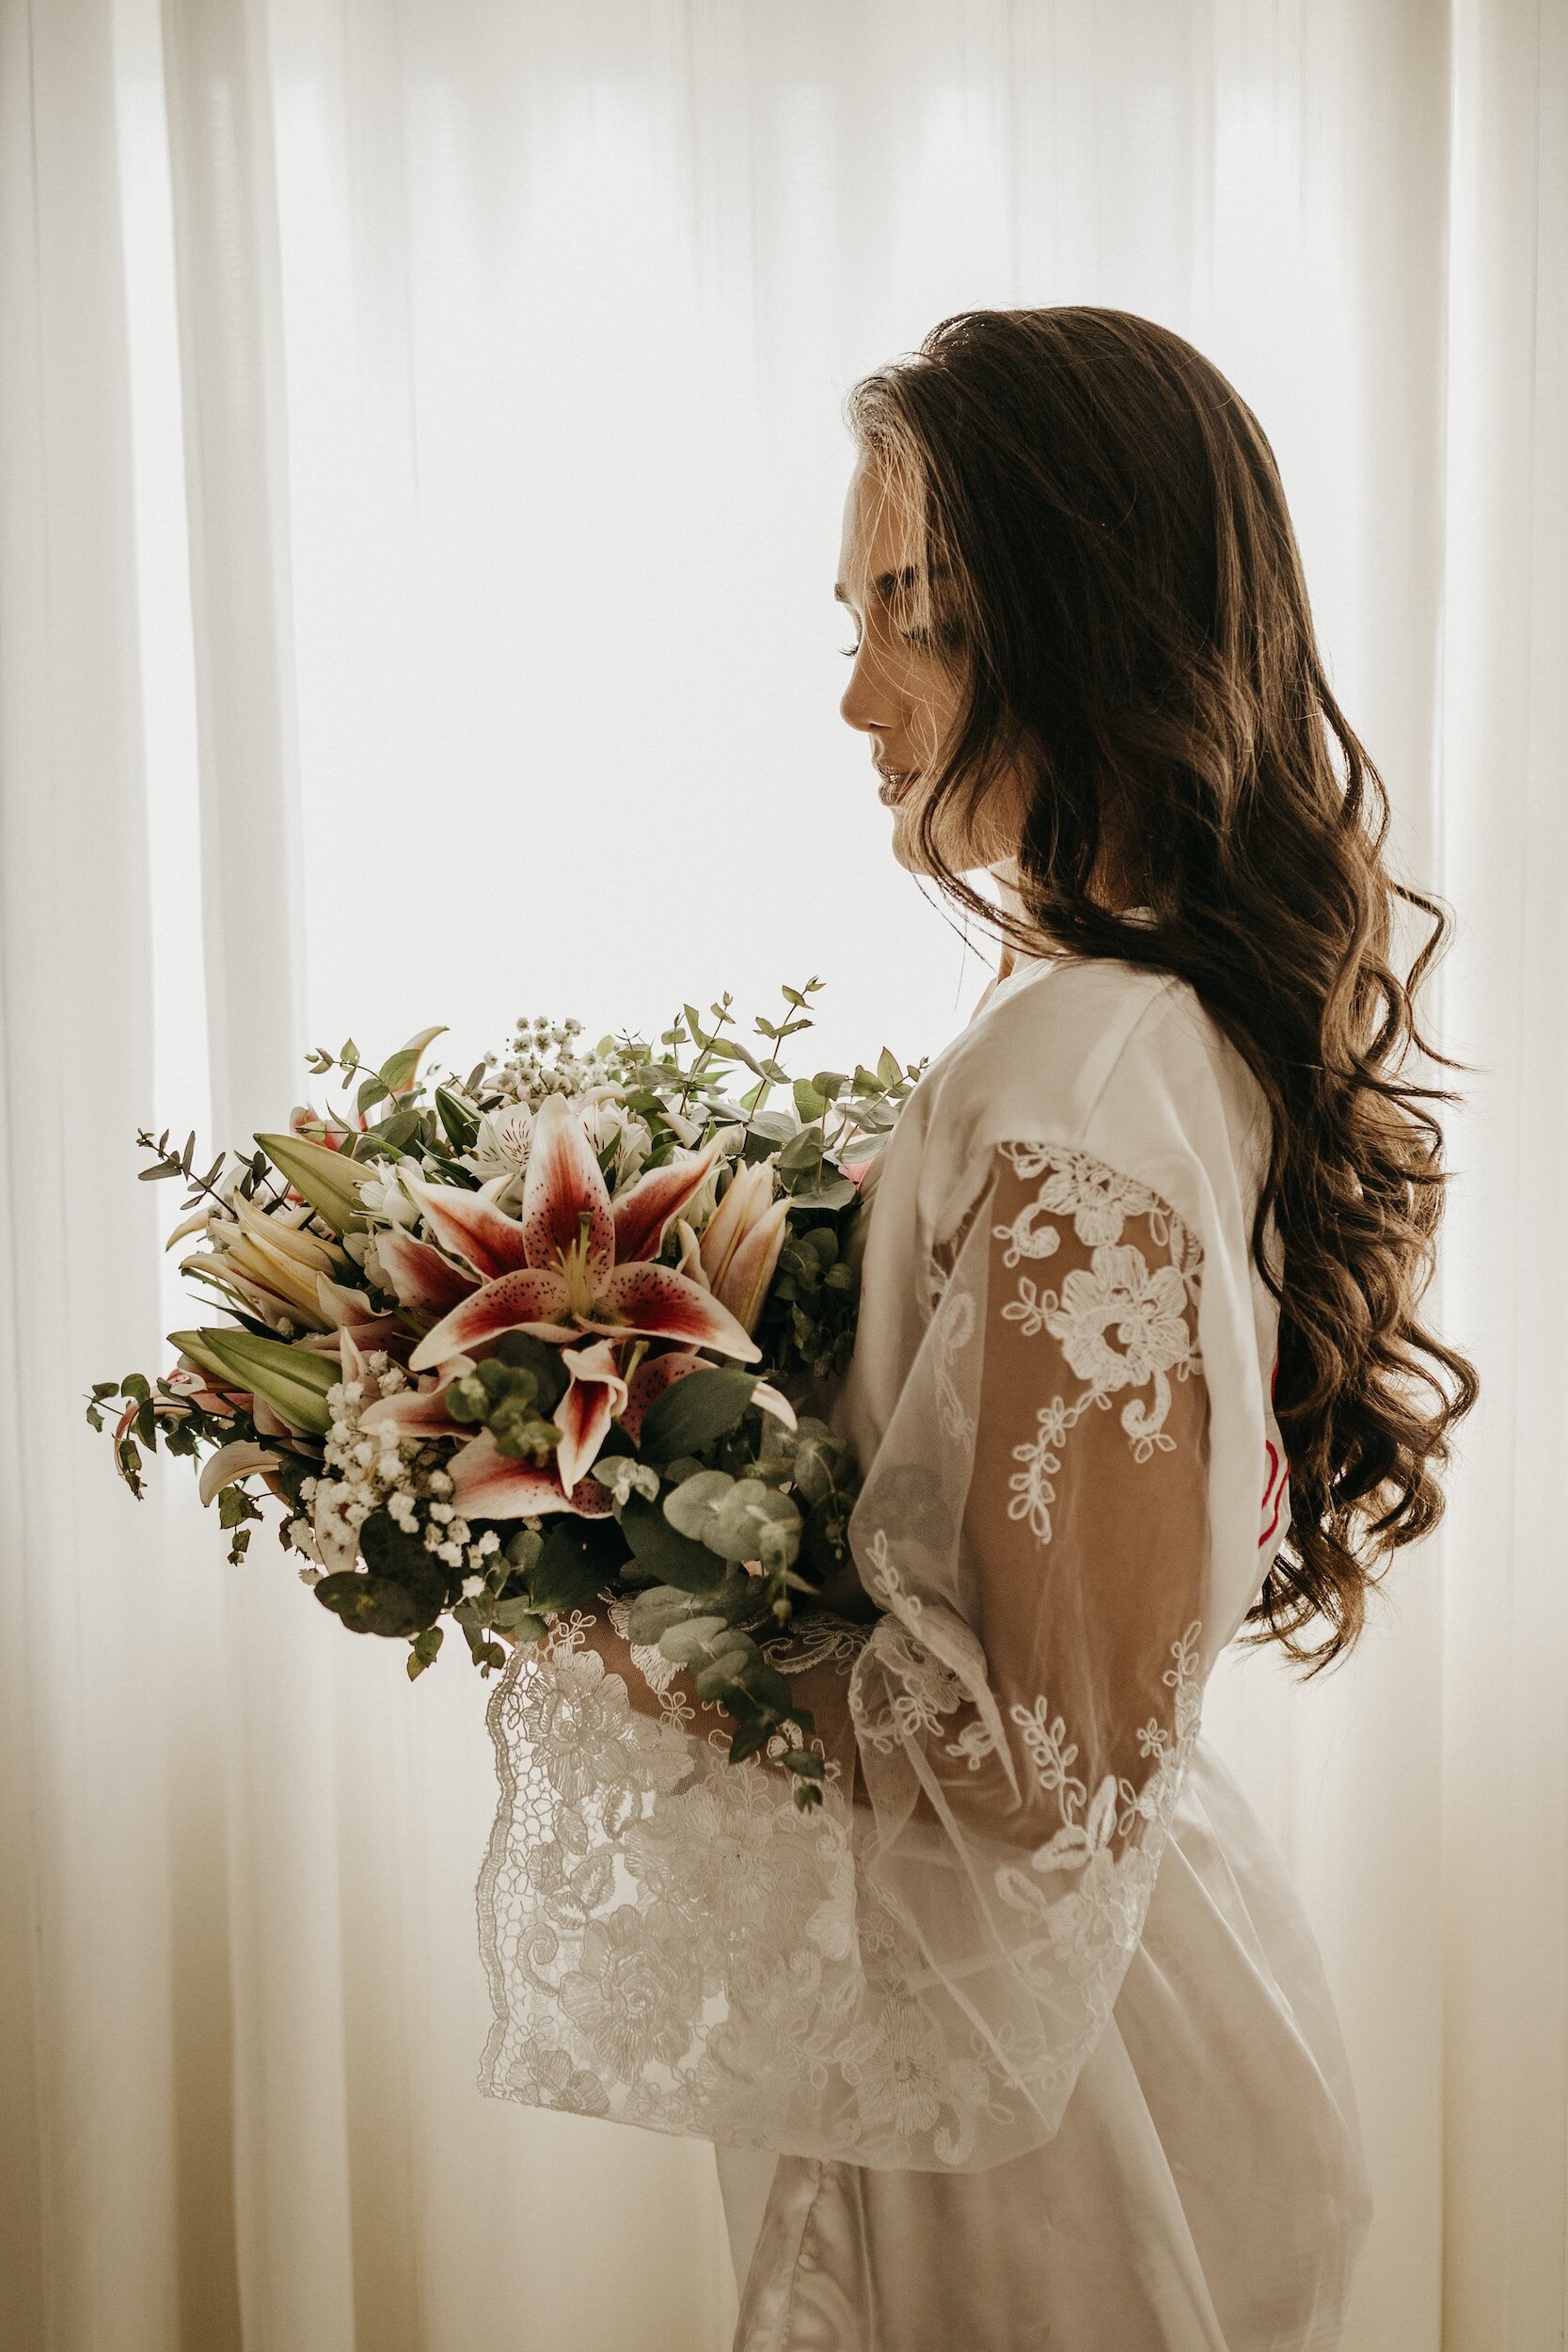 Fit And Flare Wedding Dress With Floral Embroidery | Kleinfeld Bridal